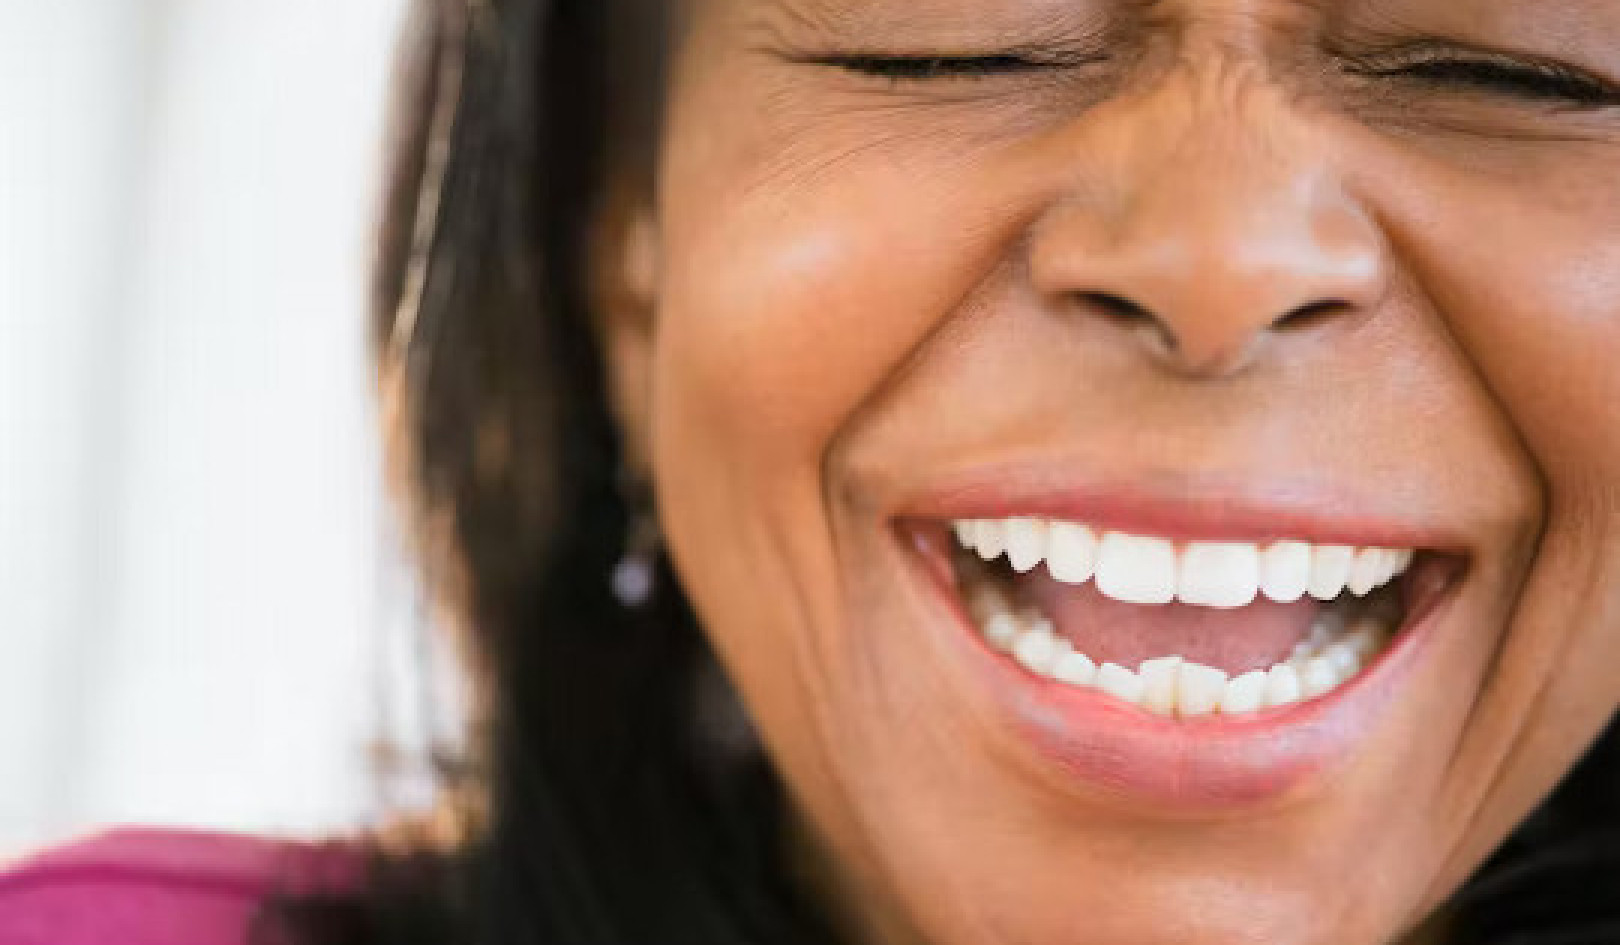 Why Do We Laugh? New Study Considers Possible Evolutionary Reasons